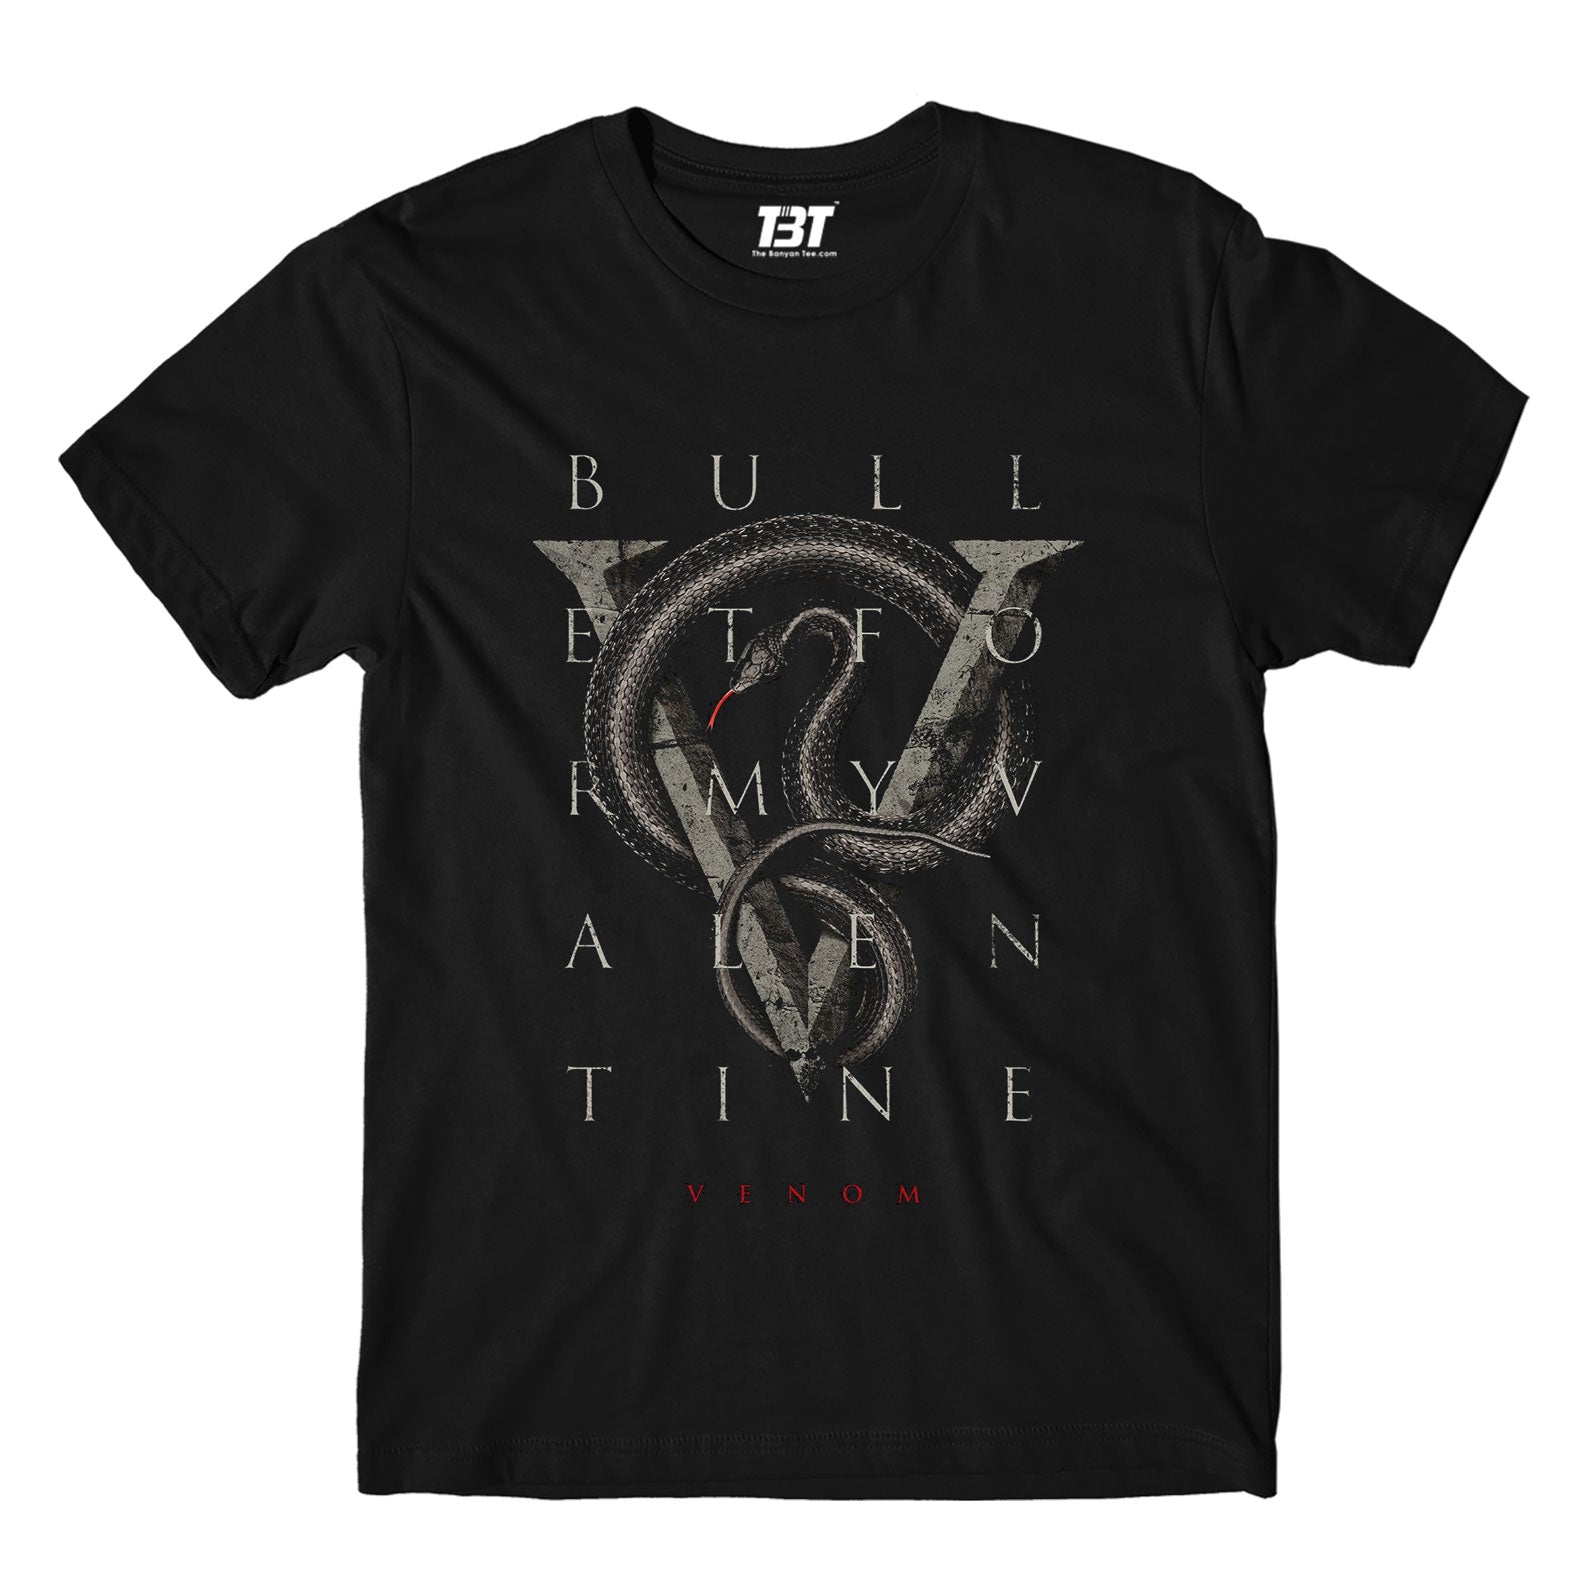 the banyan tee merch on sale Bullet for My Valentine T shirt - On Sale - 4XL (Chest size 50 IN)